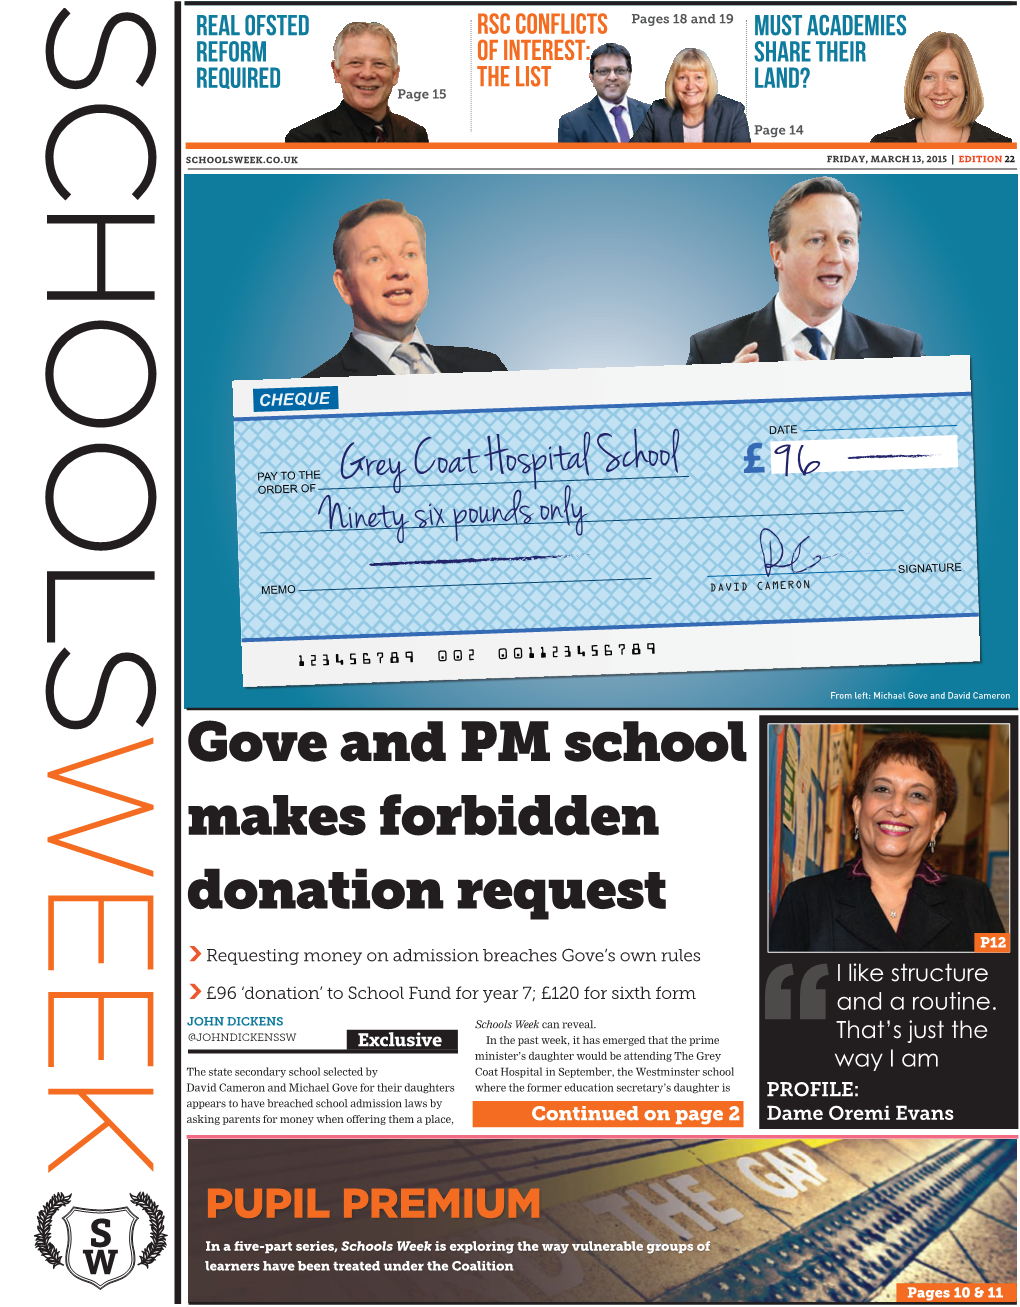 Gove and PM School Makes Forbidden Donation Request